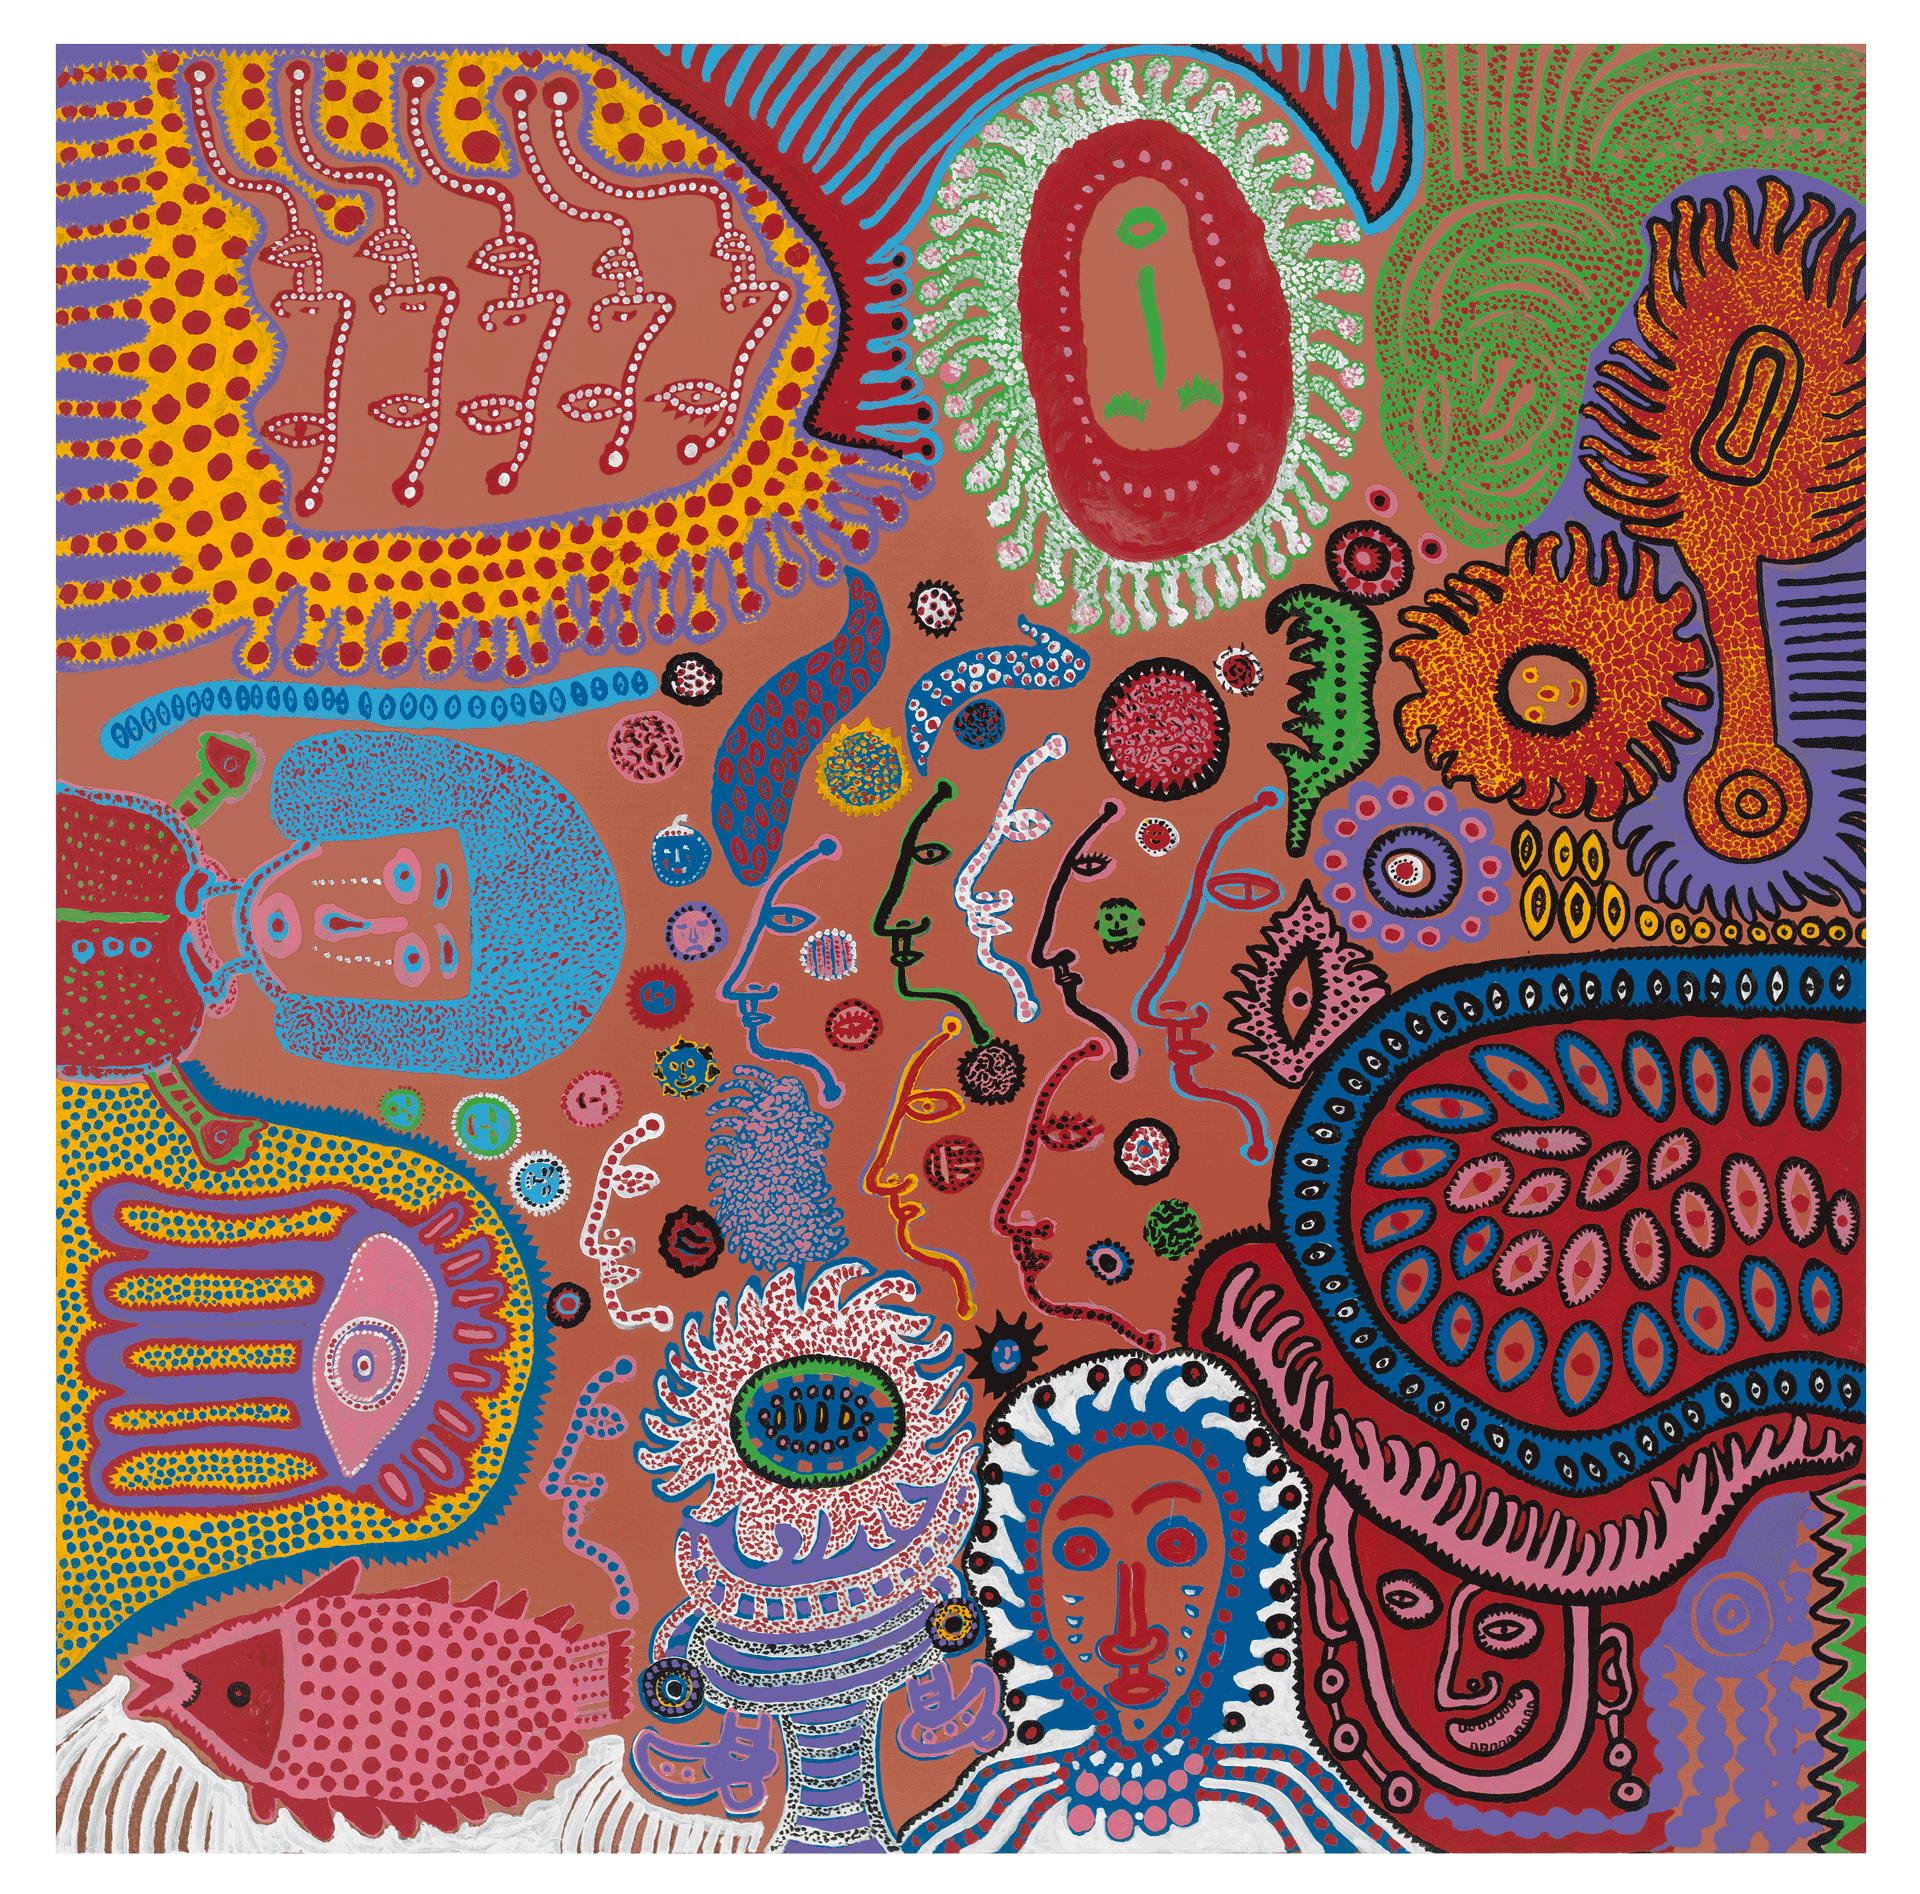 A painting by Yayoi Kusama, tiled GIVE ME LOVE, dated 2015.